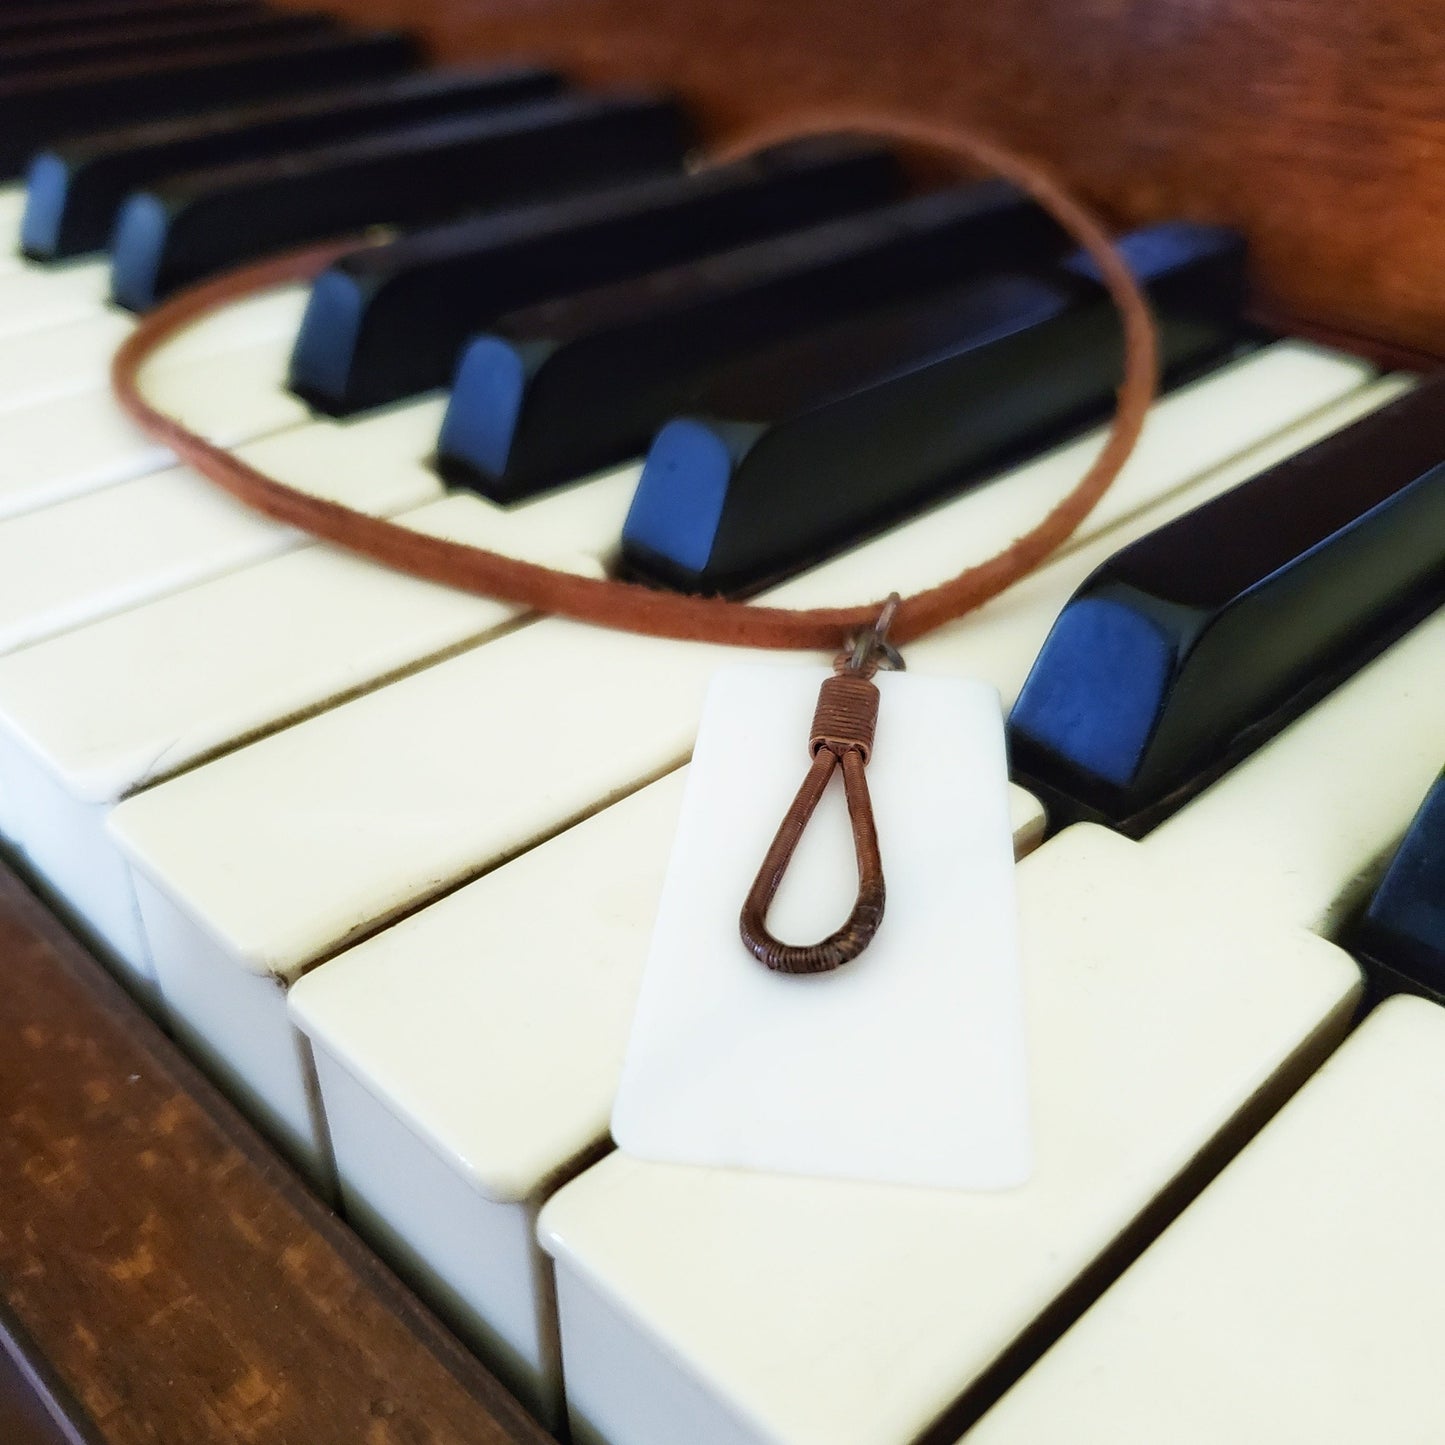 necklace made from an upcycled ivory piano key topper and a teardrop shaped upcycled piano string both hanging on a brown suede chord - necklace is on piano keys